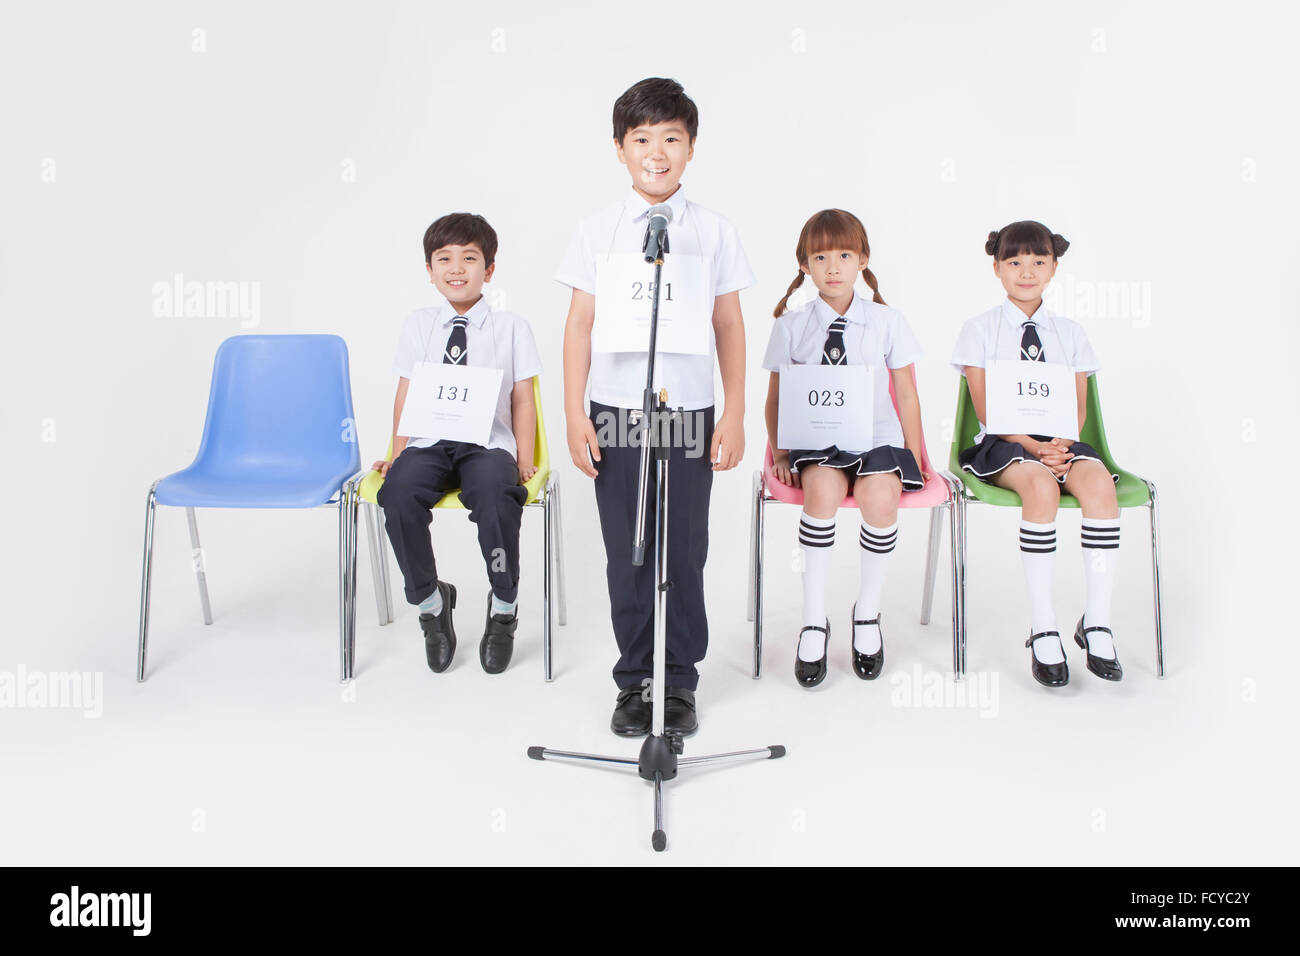 Elementary school boy standing behind a microphone and three other students seated on a chair behind him all in school uniforms Stock Photo